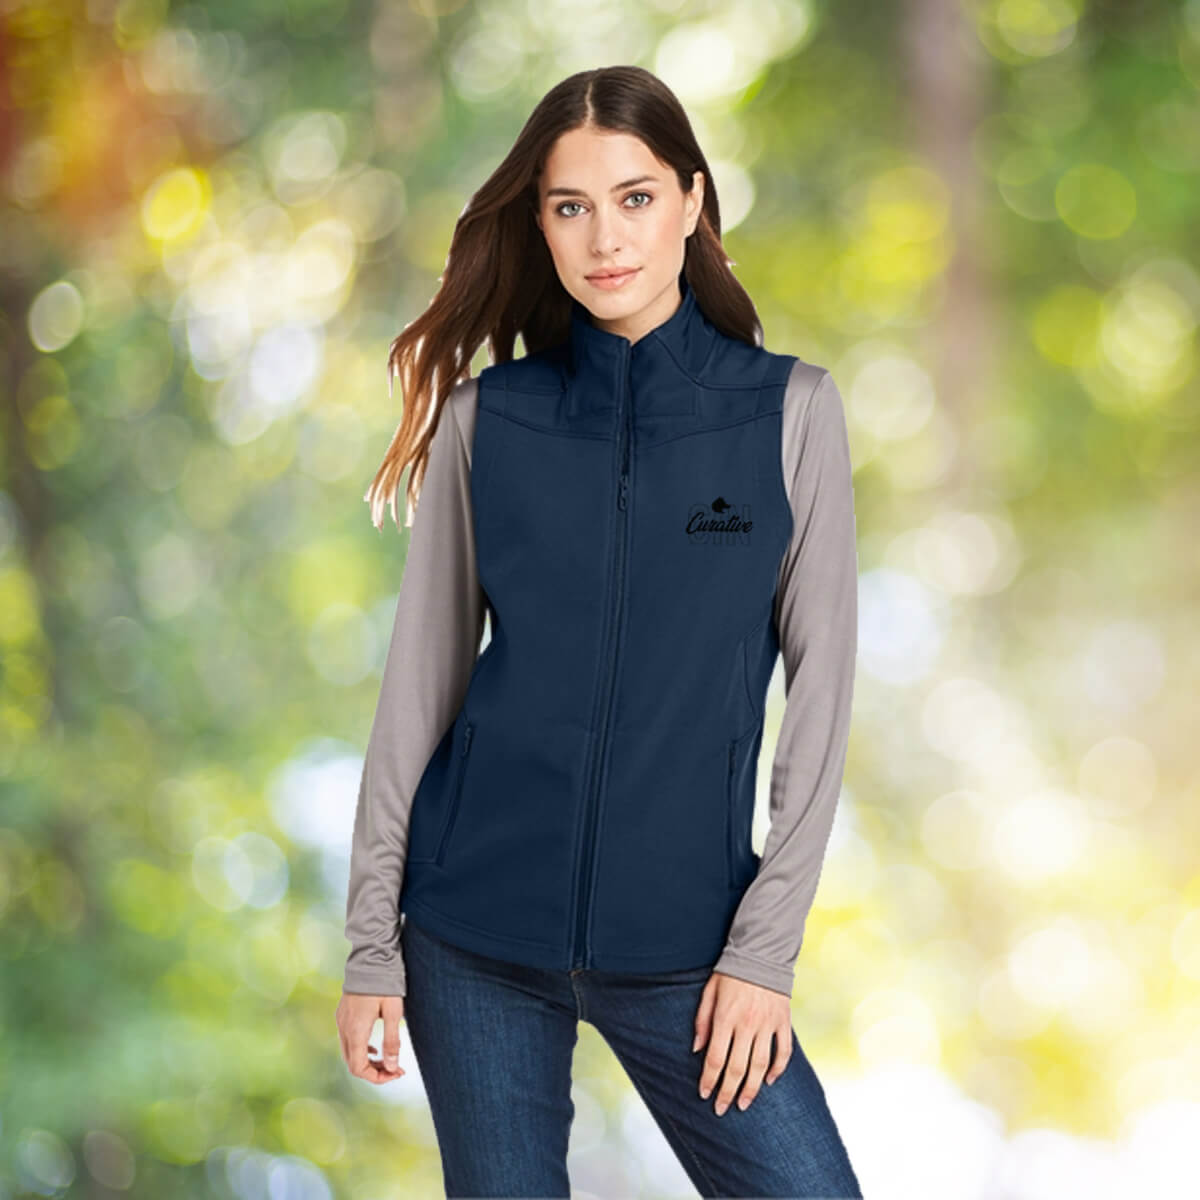 Woman outdoors wearing navy vest outerwear apparel with black curative printing logo imprint